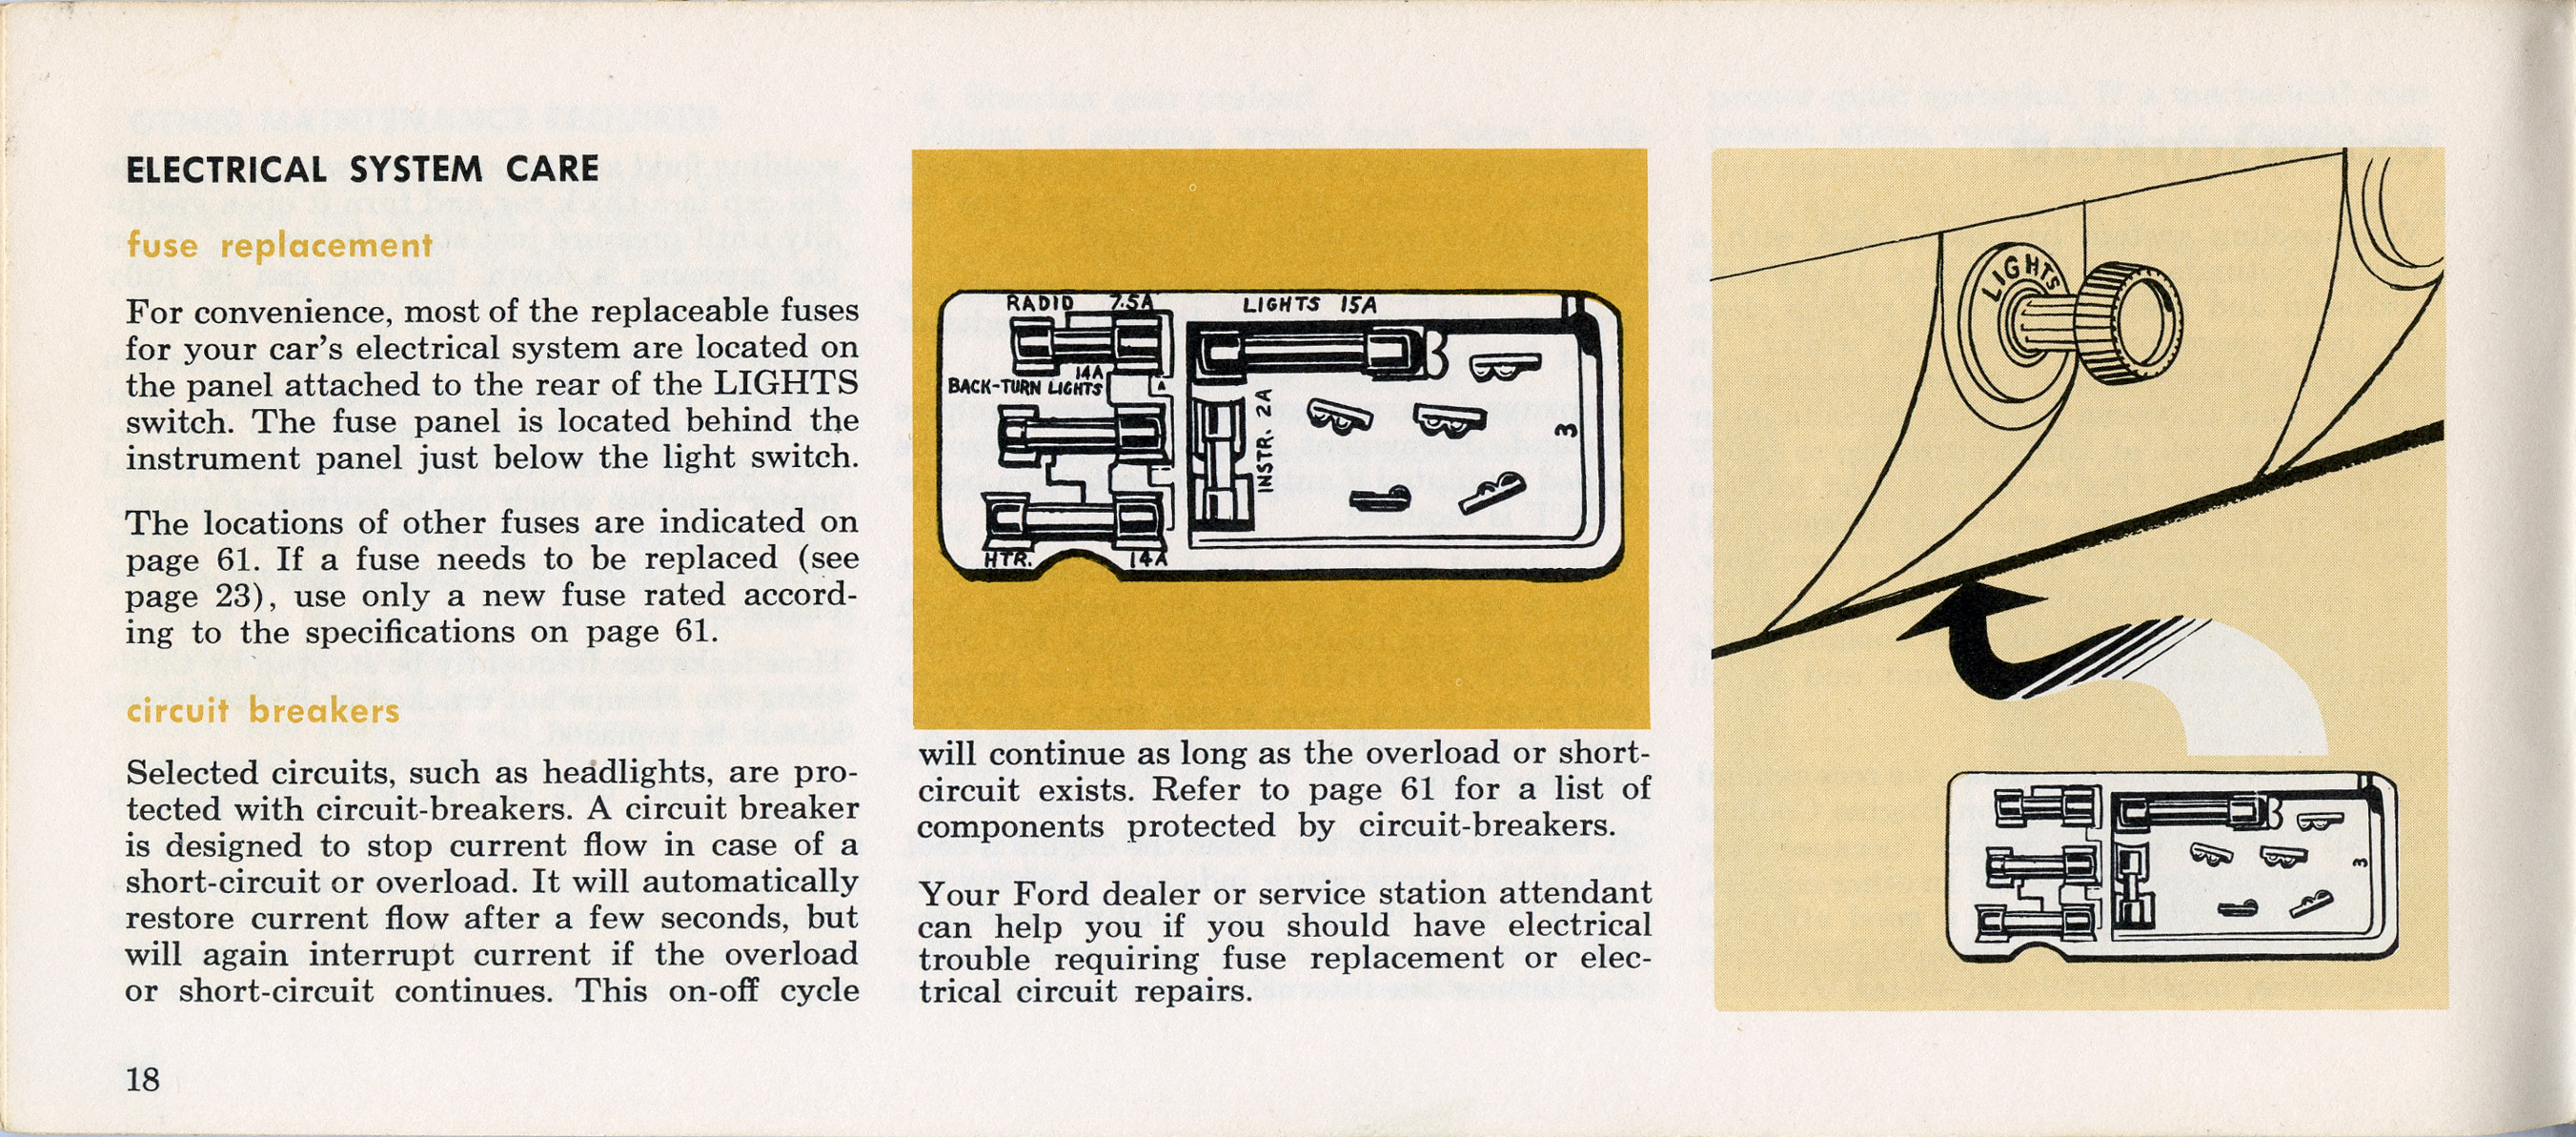 1964_Ford_Falcon_Owners_Manual-18